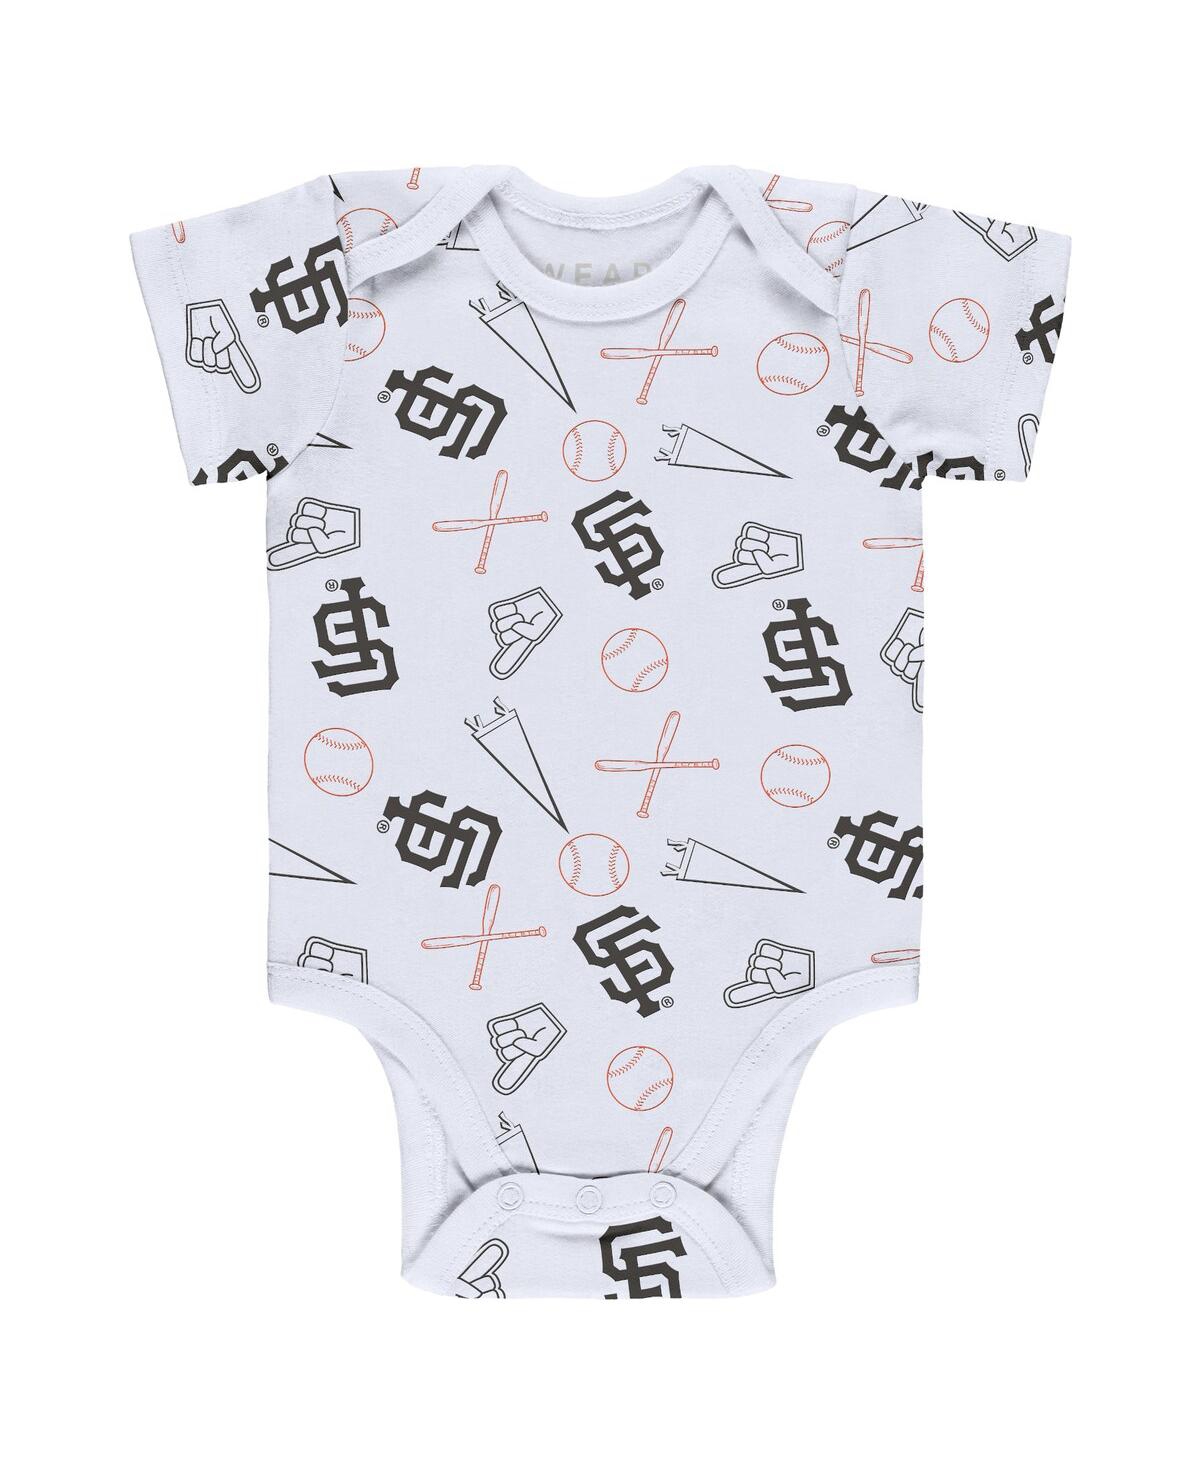 Shop Wear By Erin Andrews Baby Boys And Girls  Gray, White, Black San Francisco Giants Three-piece Turn Me In Gray,white,black